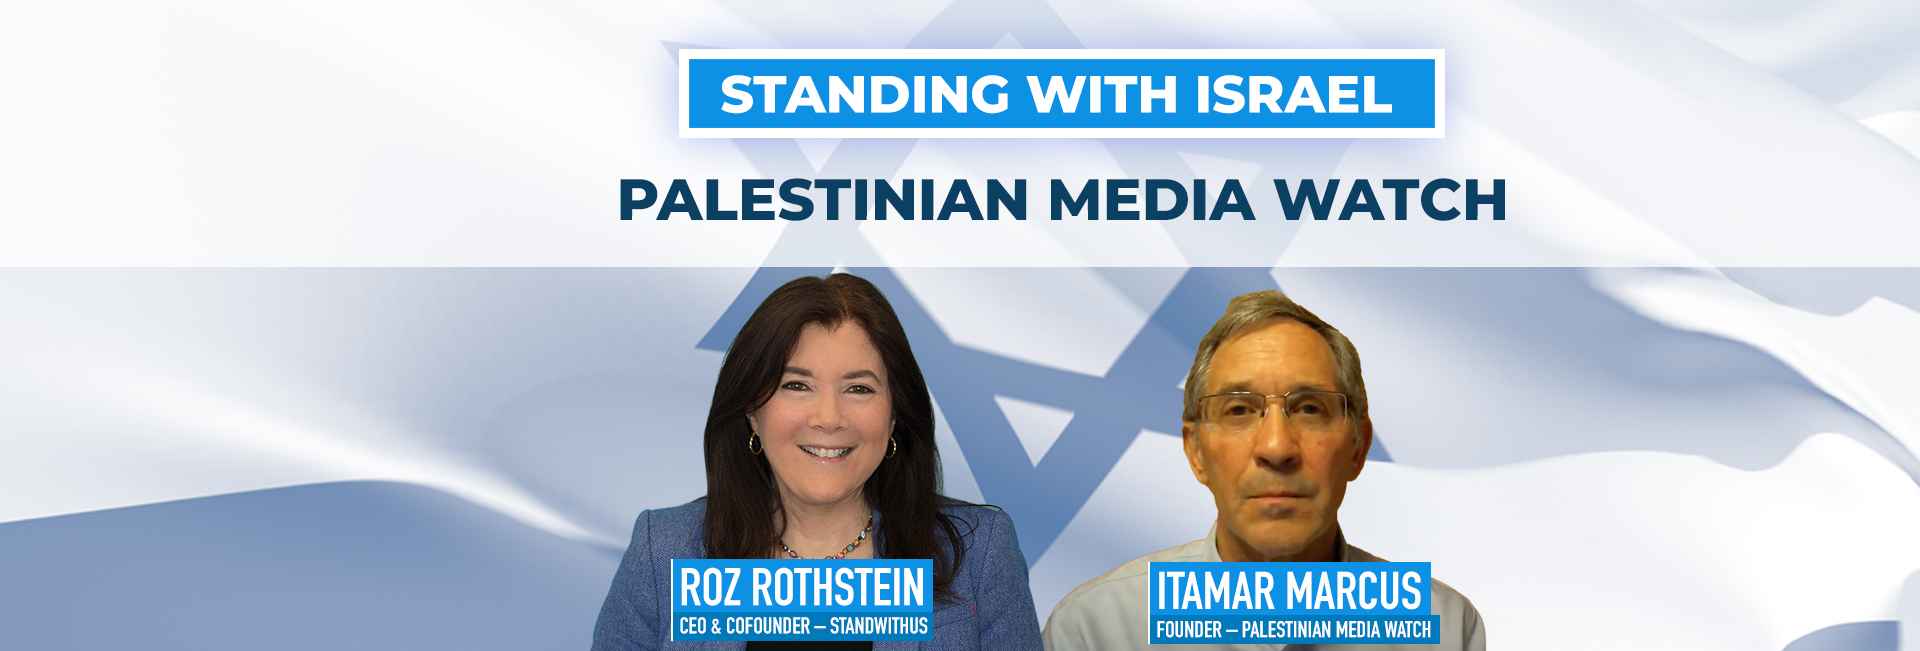 Standing With Israel with Roz Rothstein – Itamar Marcus: Palestinian Media Watch